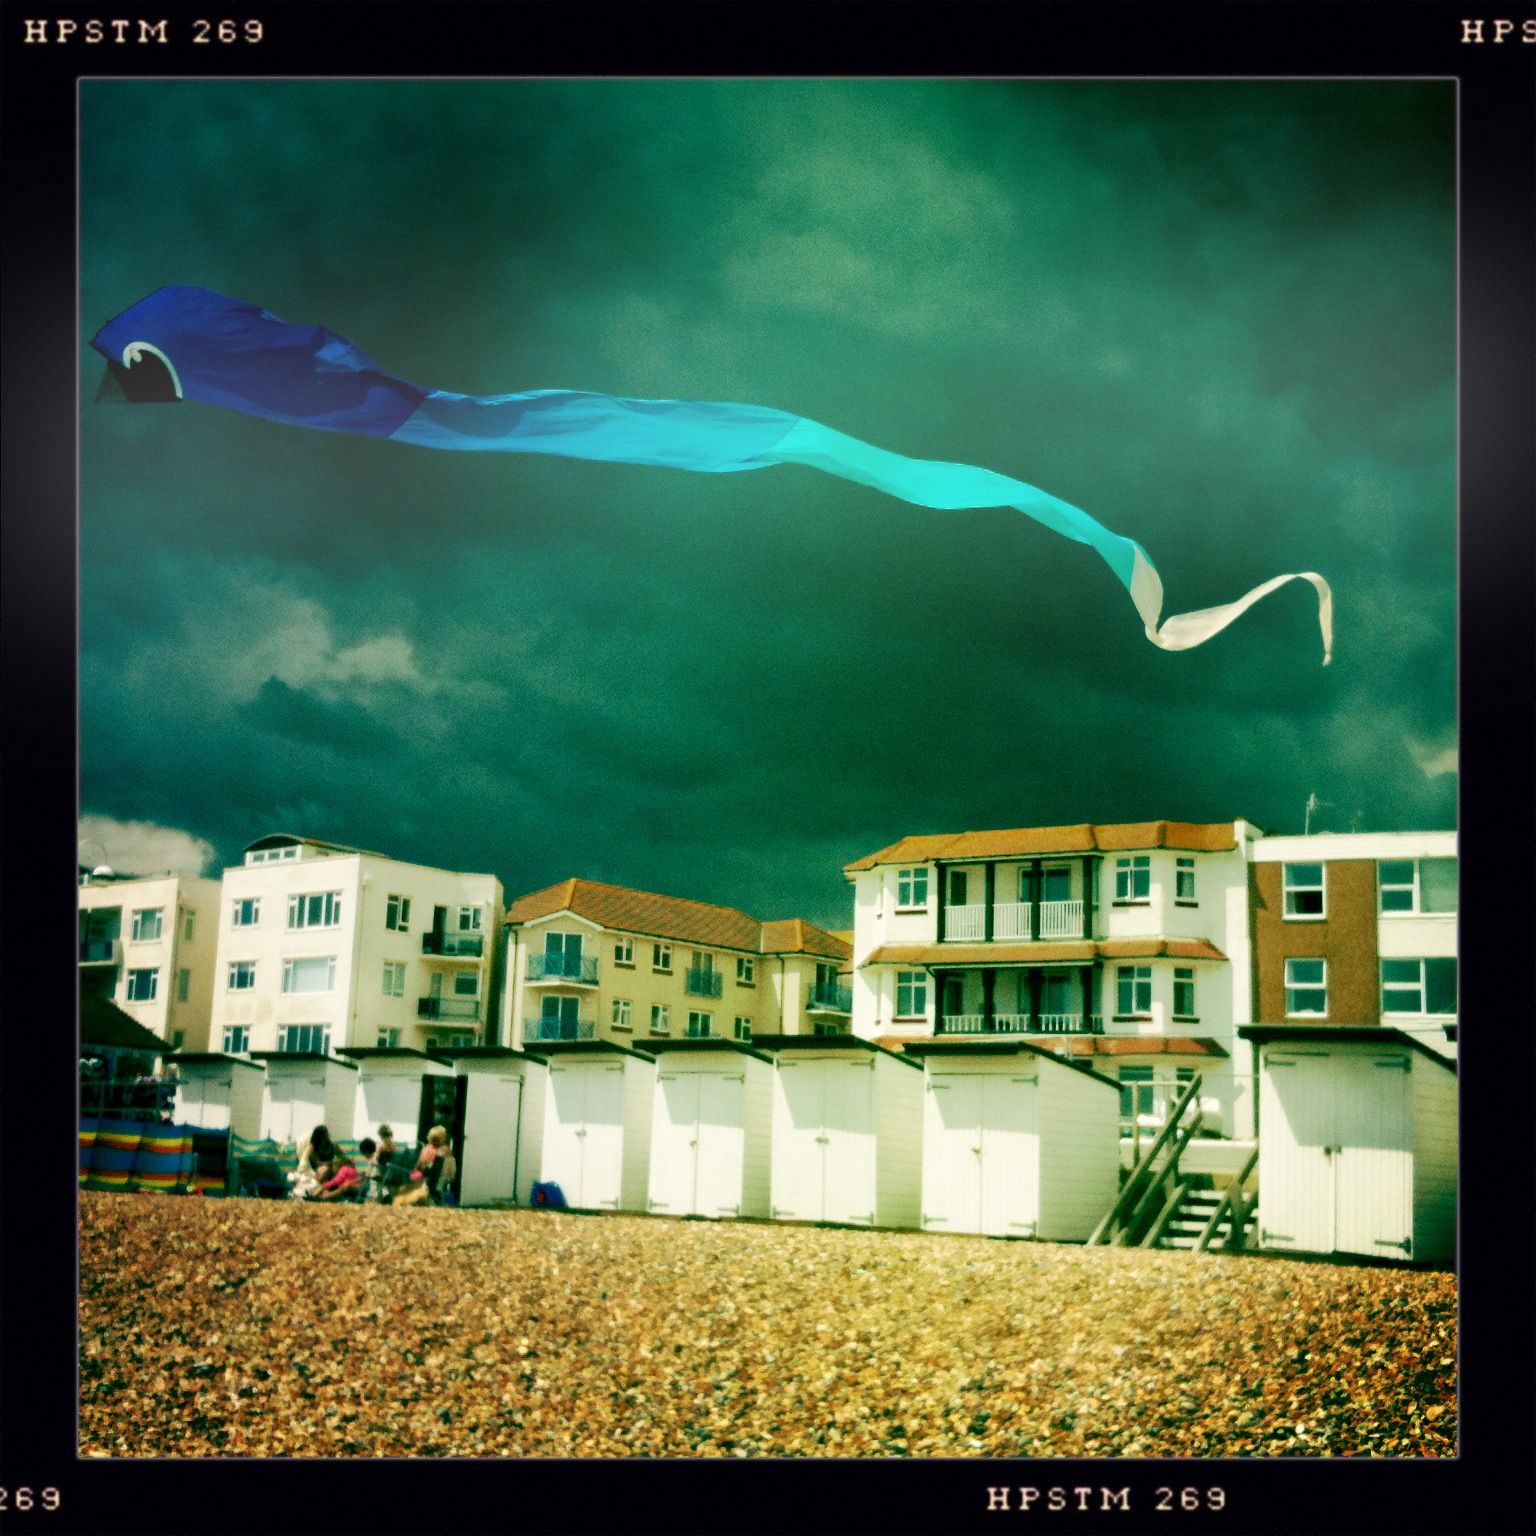 Kite Flying in a Storm - Bexhill